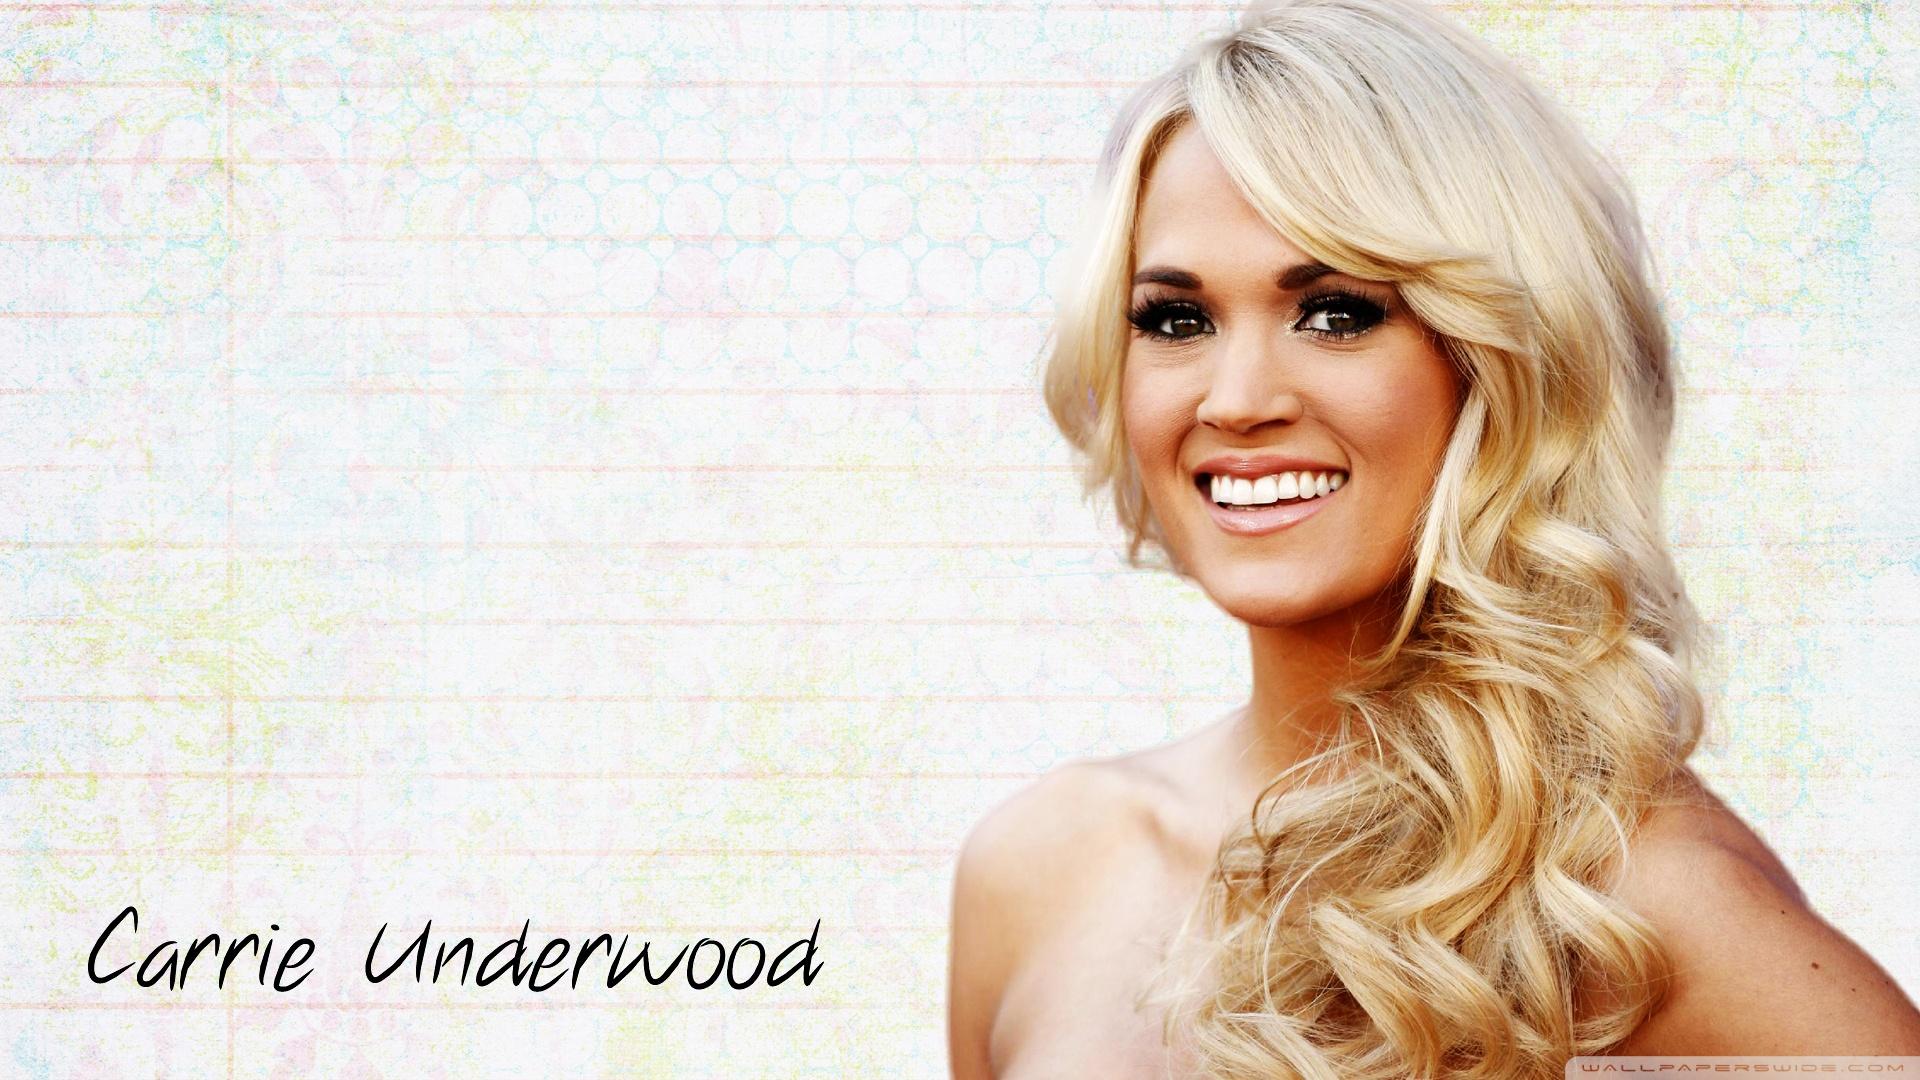 Carrie Underwood Wallpapers Wallpaper Cave 85428 Hot Sex Picture